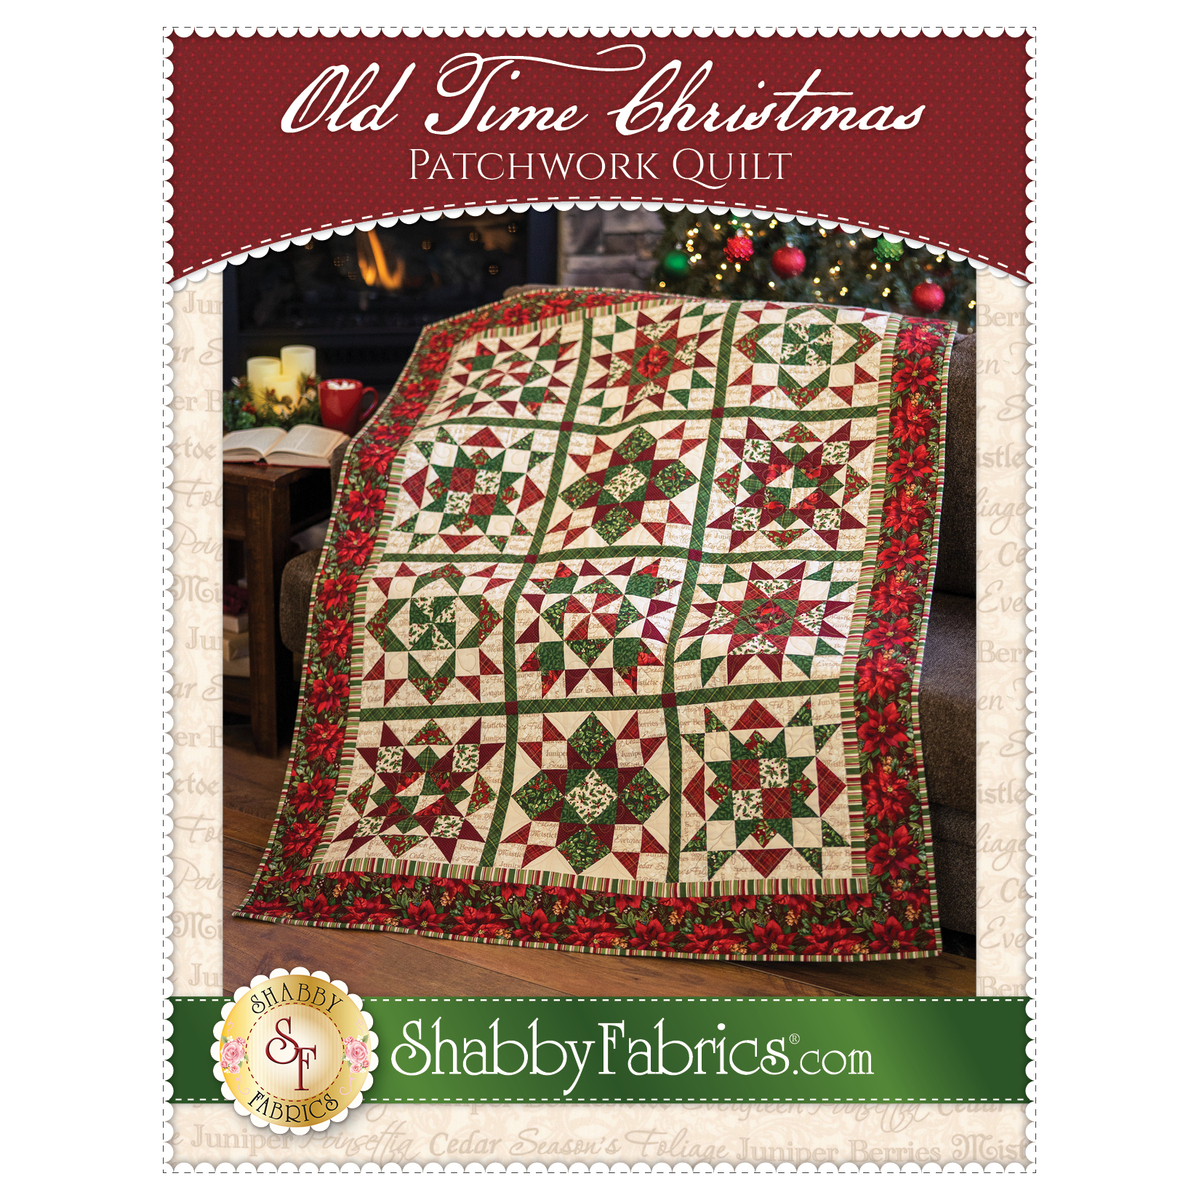 Old Time Christmas Patchwork Quilt Pattern | Shabby Fabrics